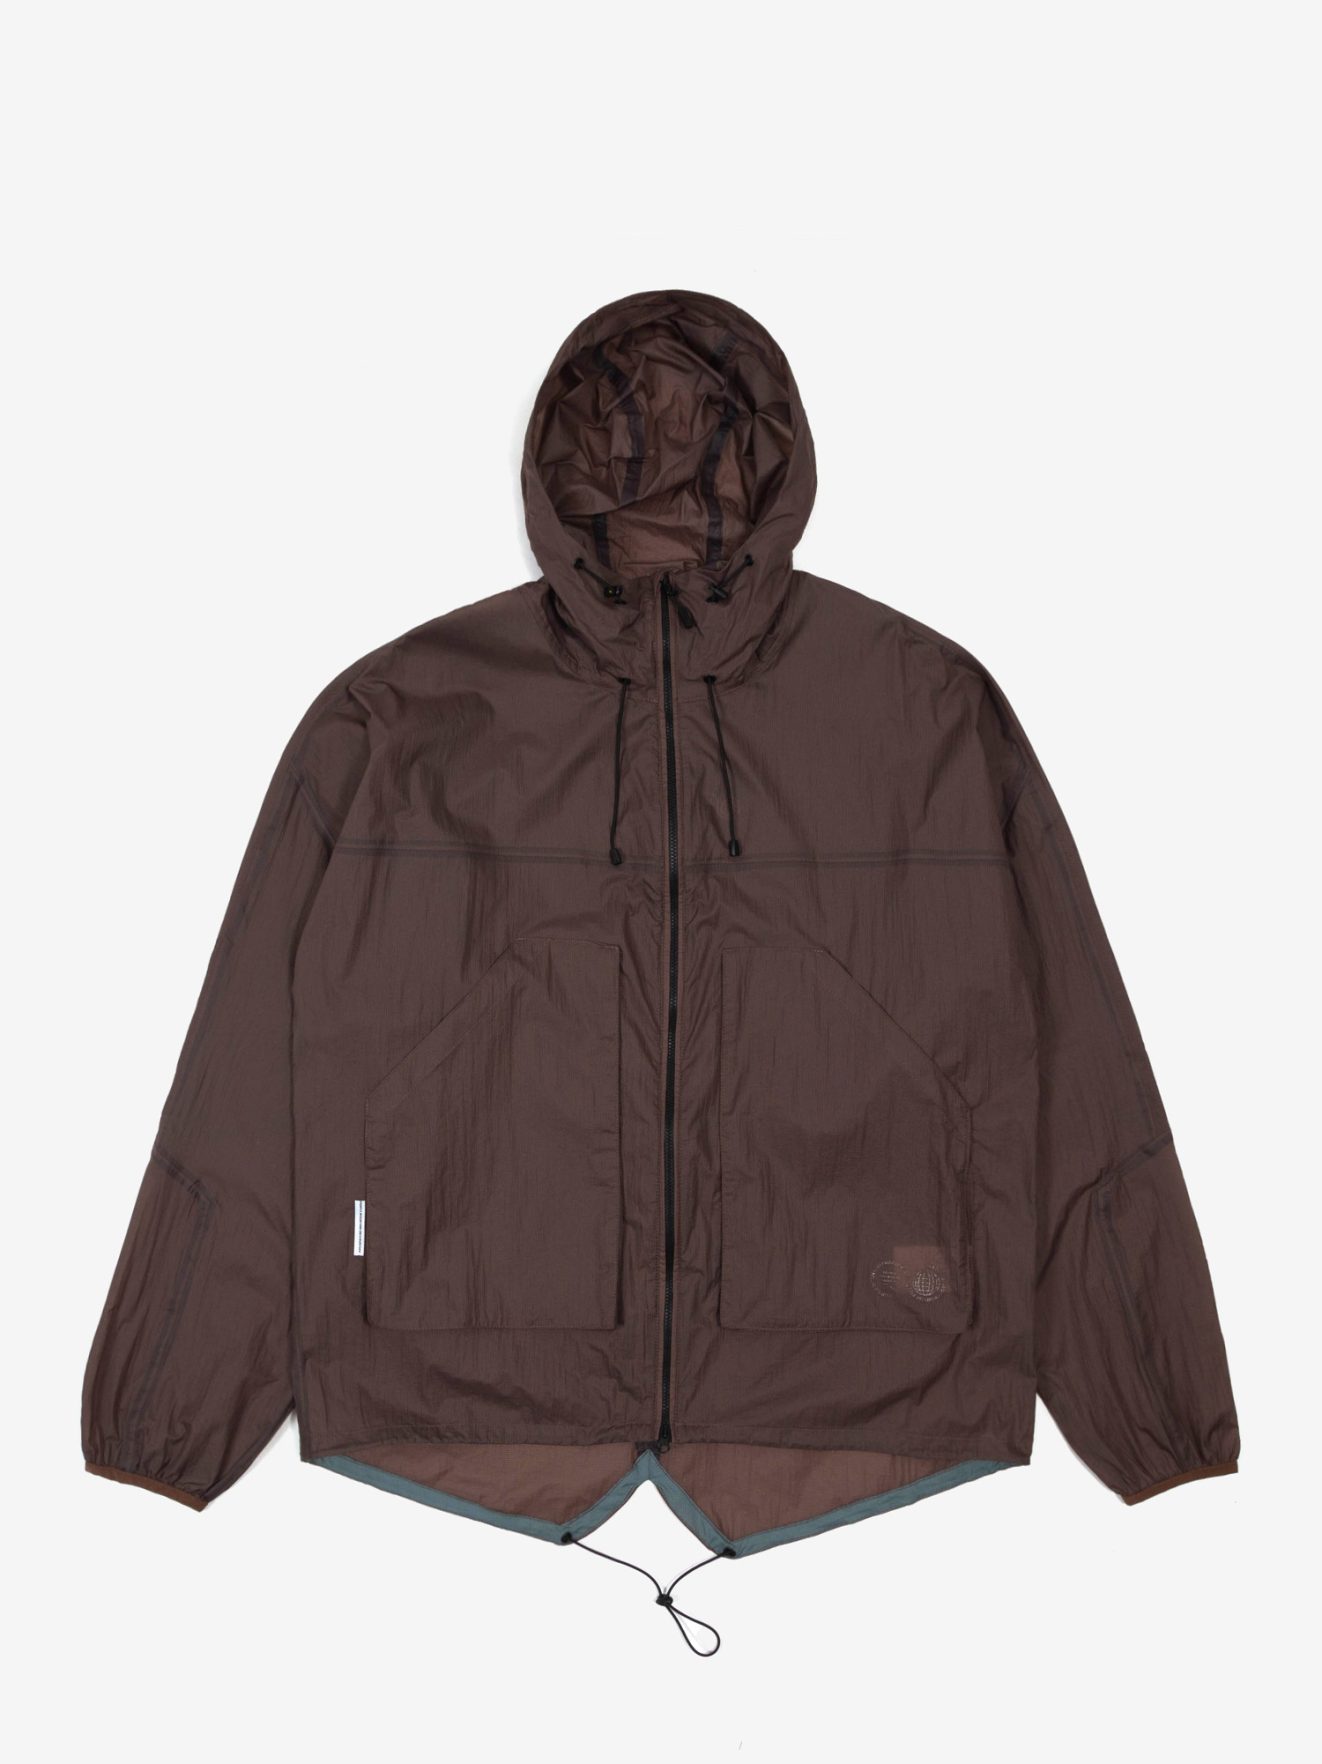 FISHTAIL RIPSTOP HOODED JACKET BROWN - Purple Mountain Observatory